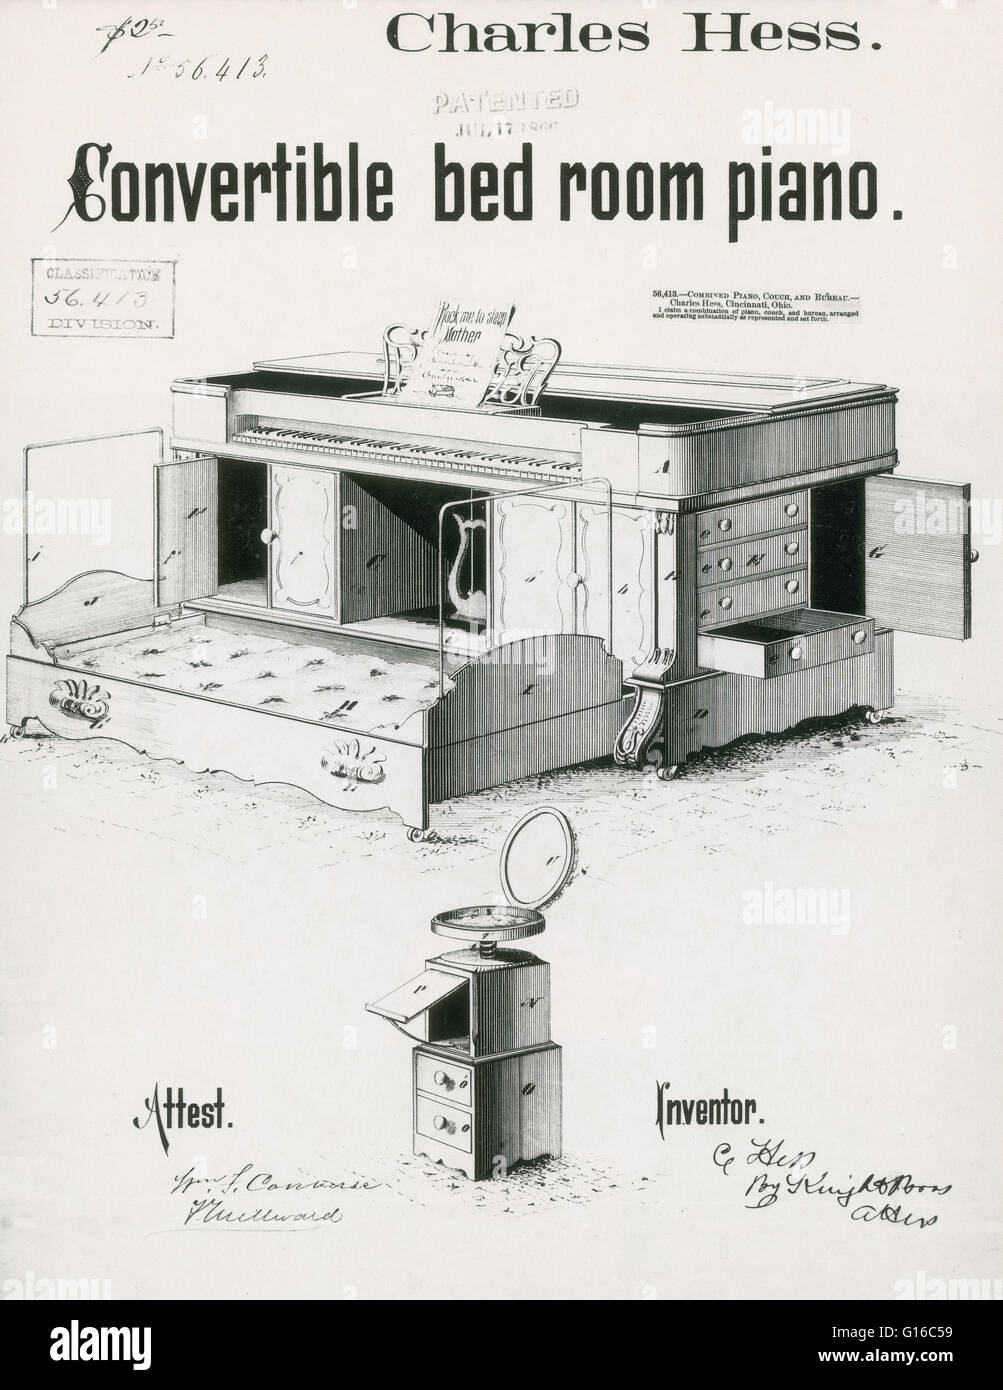 Patent Drawing for Convertible Bed Room Piano, July 17, 1866. Charles Hess's patented 'Wardrobe, Piano and Bedstead,' which was also known as the 'Convertible bed room piano' would turn the parlor into the bedroom. During the second half of the 19th centu Stock Photo